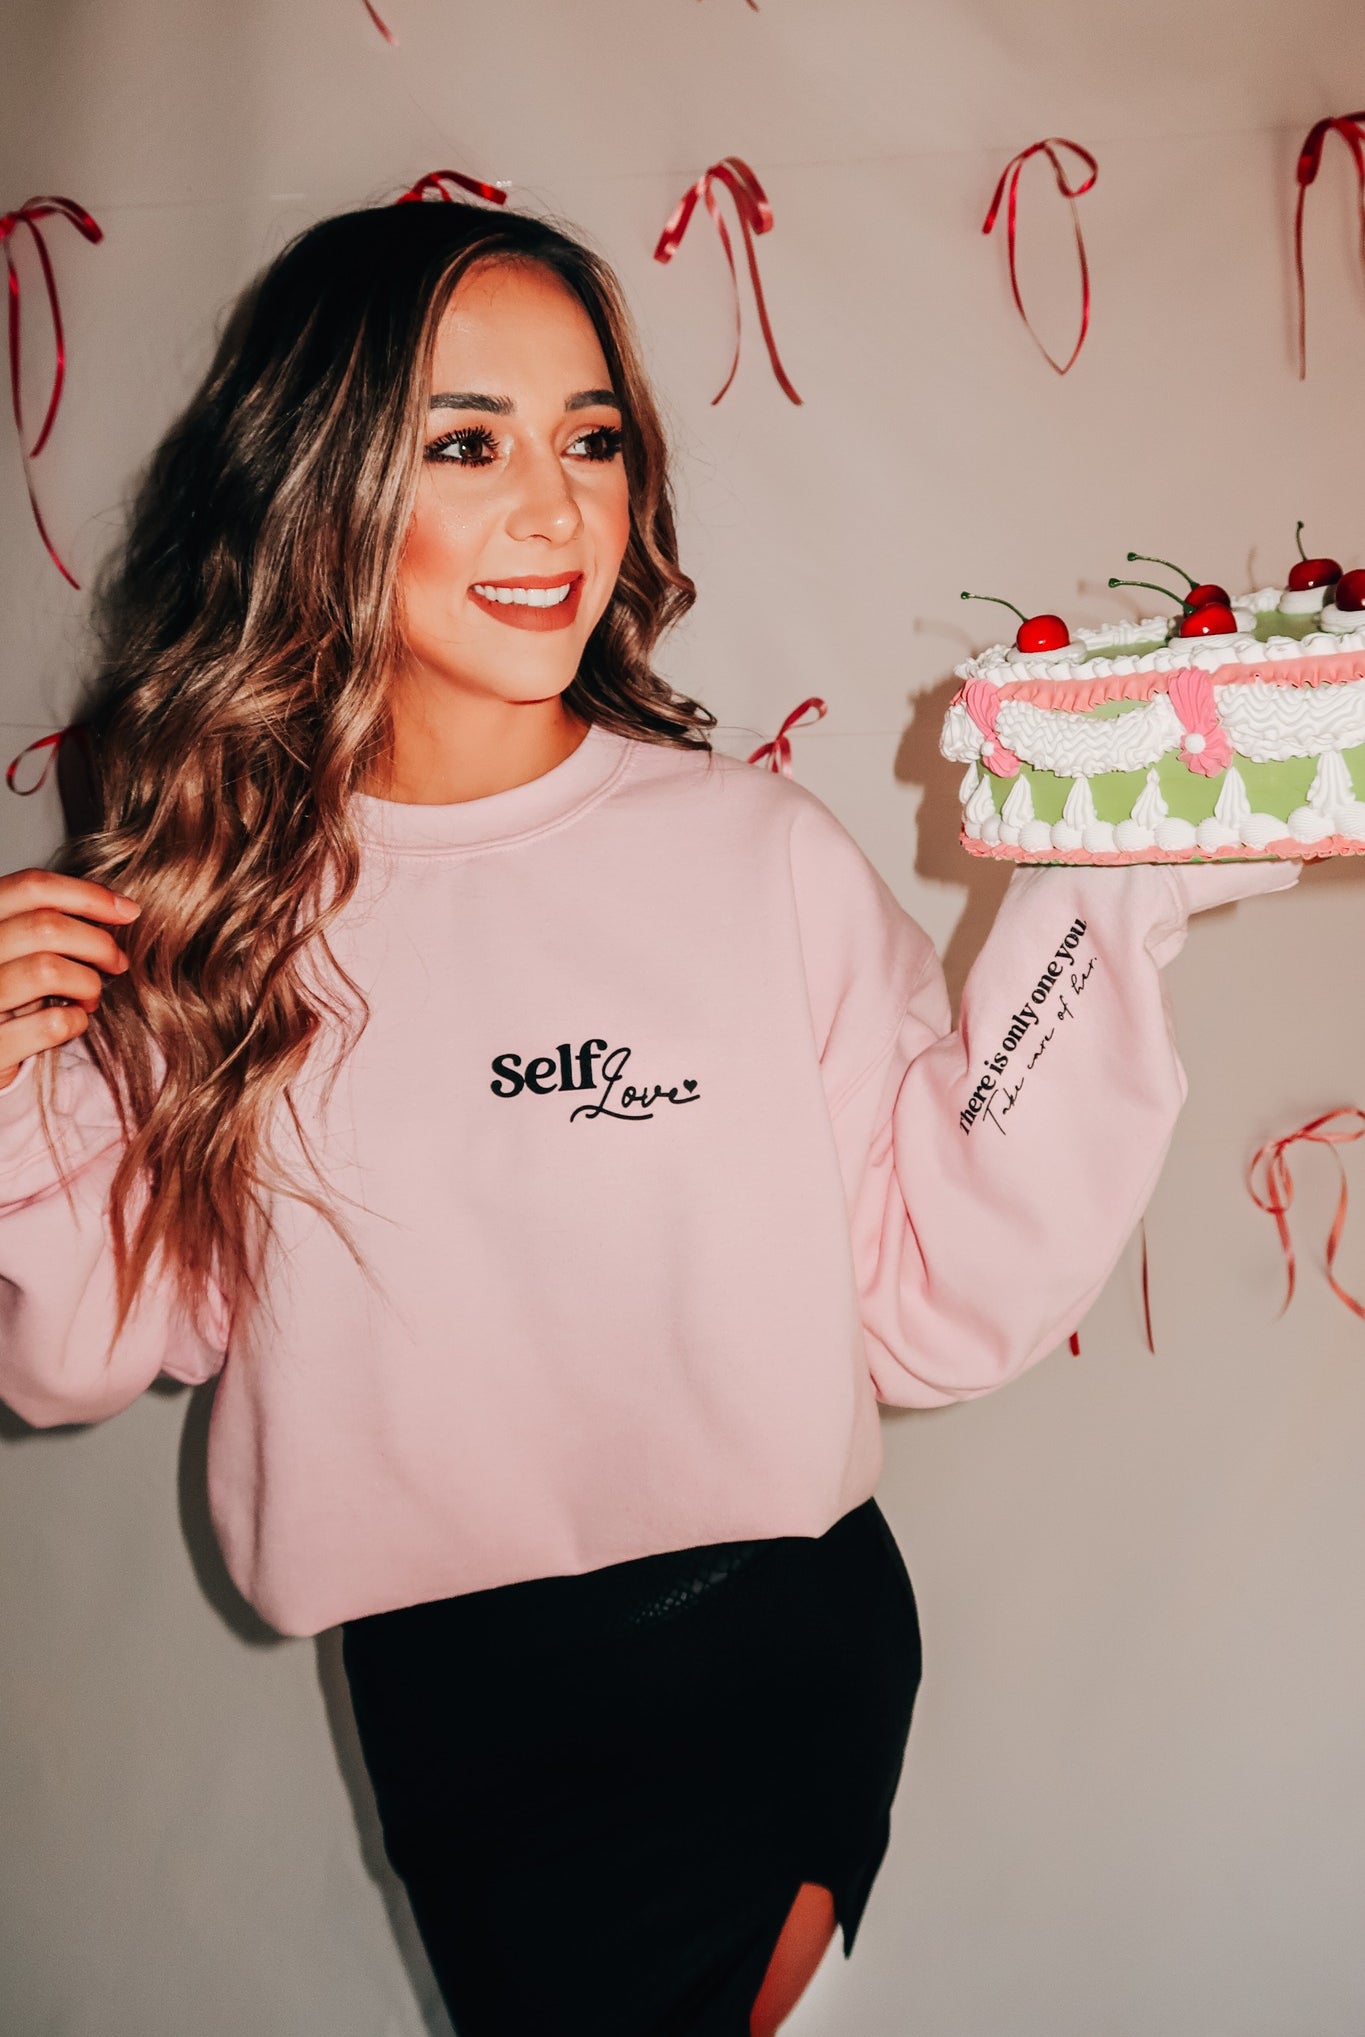 Valentines Self Love ~ Don't Settle Long Sleeve Graphic Sweatshirt - Be You Boutique